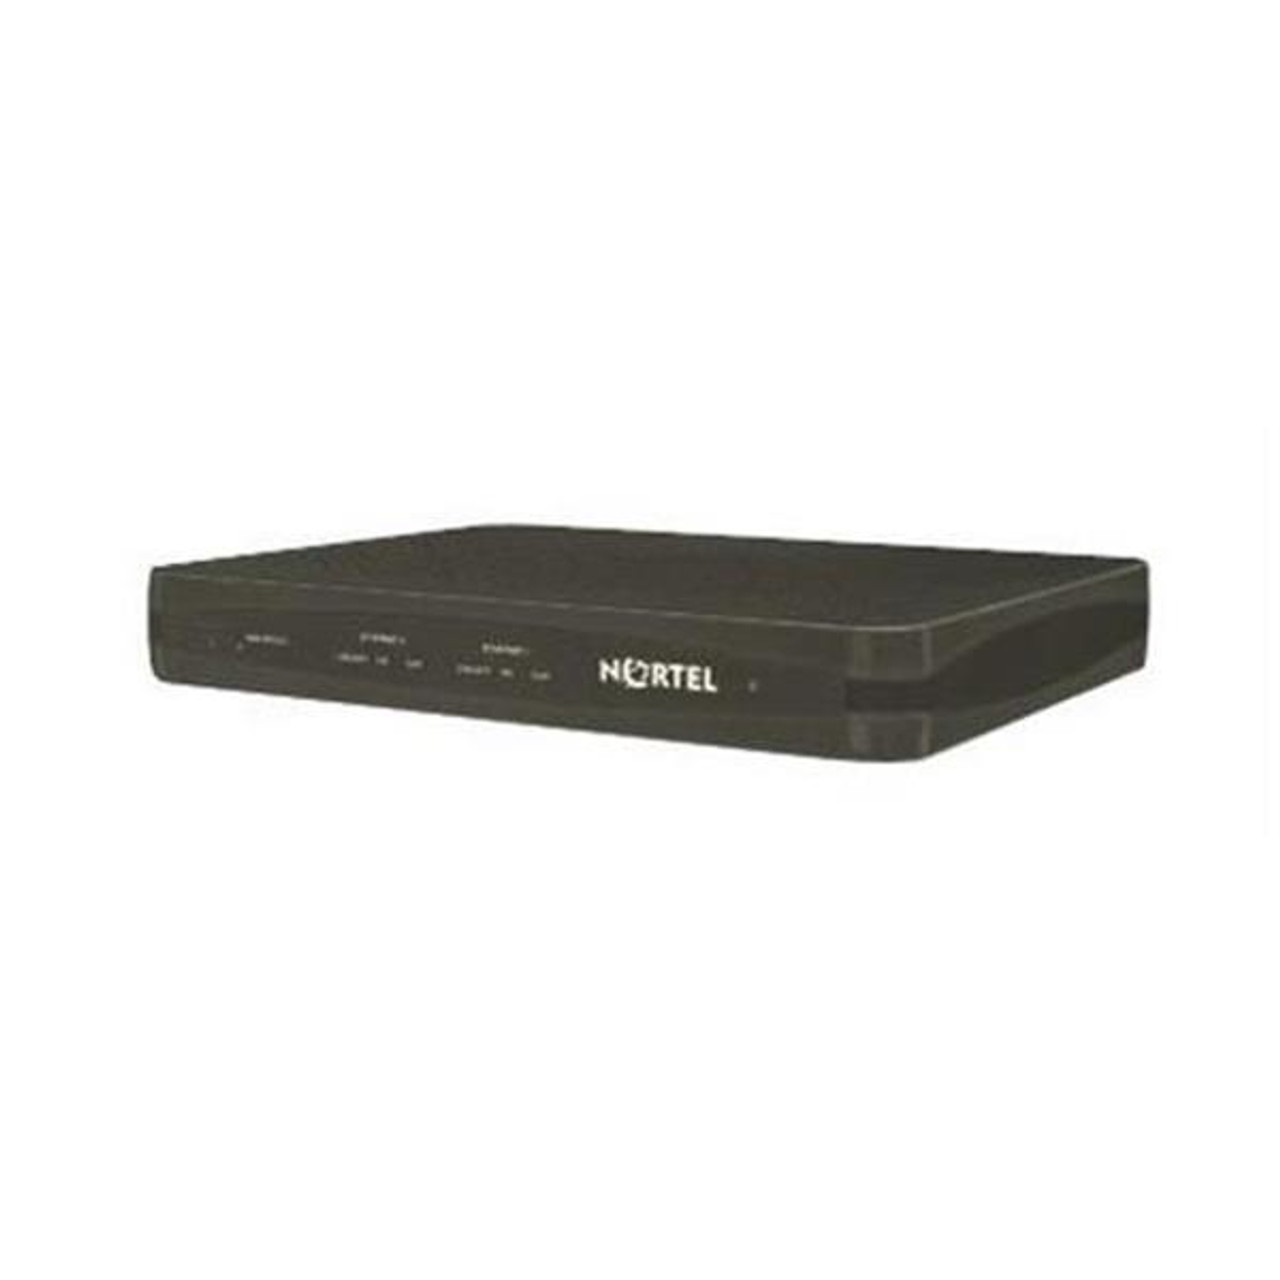 CV1001037 Nortel Arn Router Ac PowerBay Networks Access Router (Refurbished)